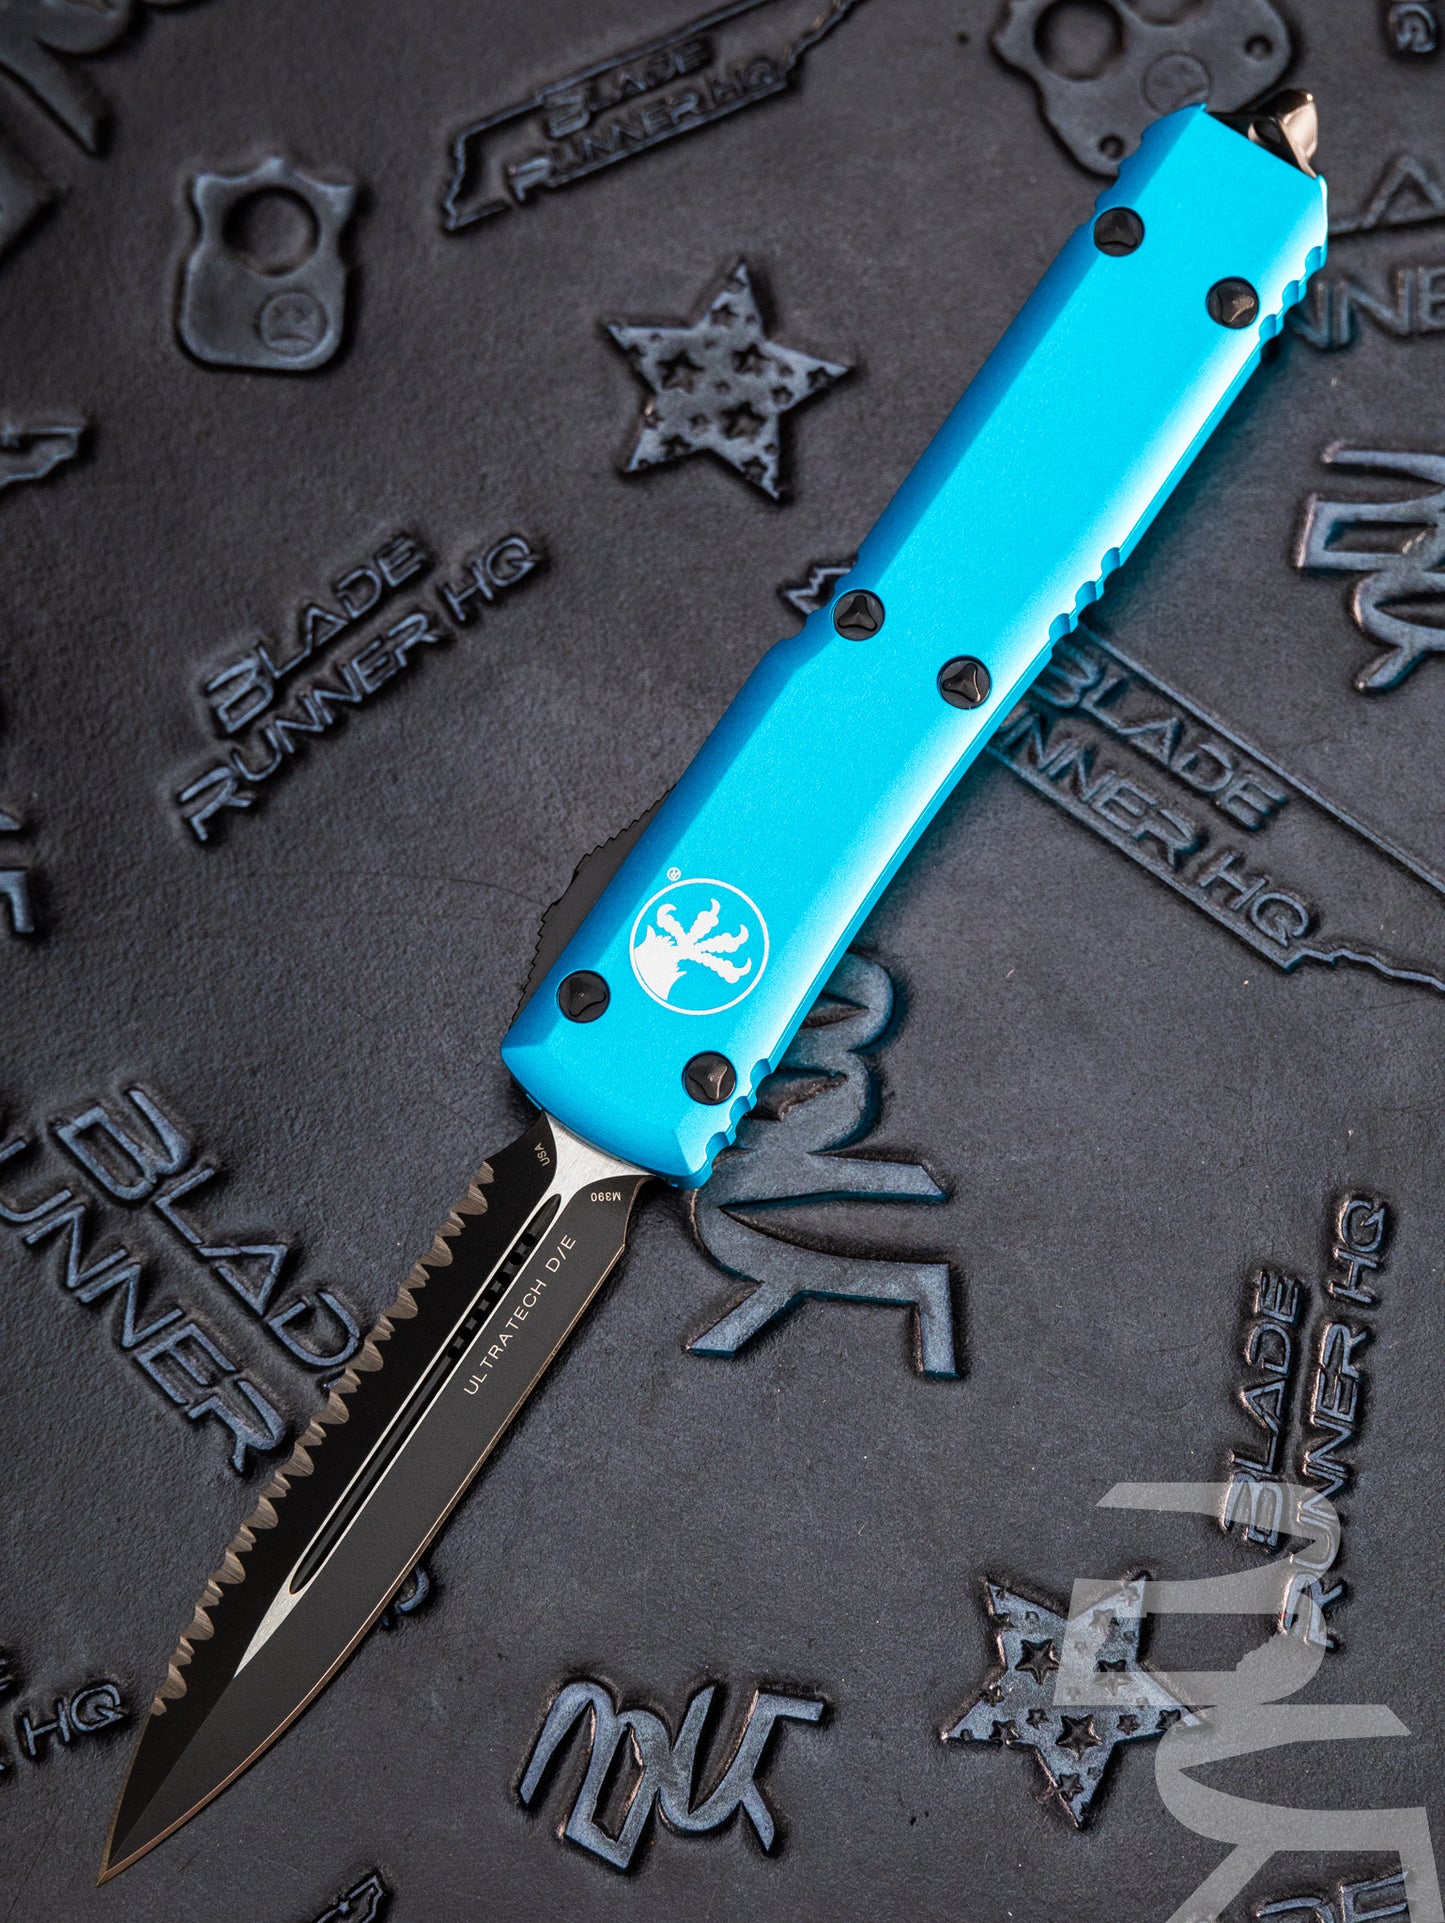 Microtech Ultratech D/E OTF Automatic Knife Turquoise (3.4" Black Full Serr)